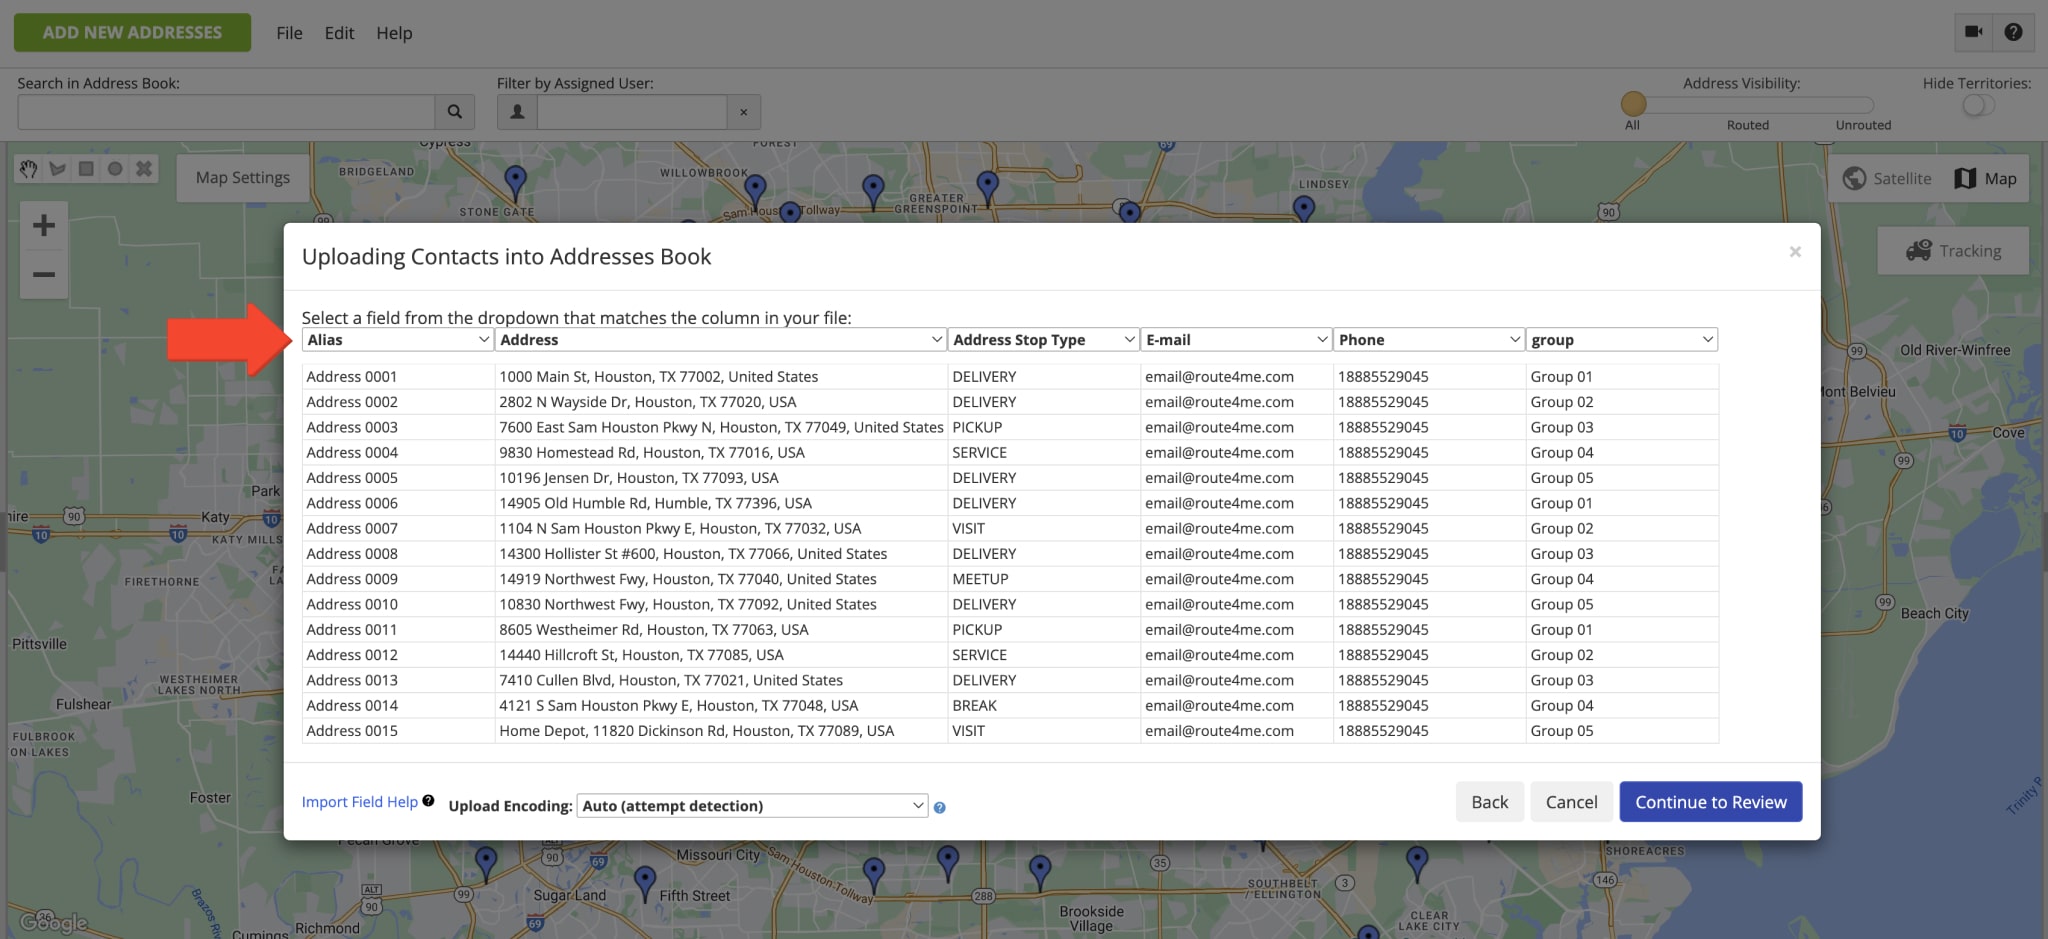 Verify the uploaded spreadsheet with addresses and customer data in the Address Book Map.